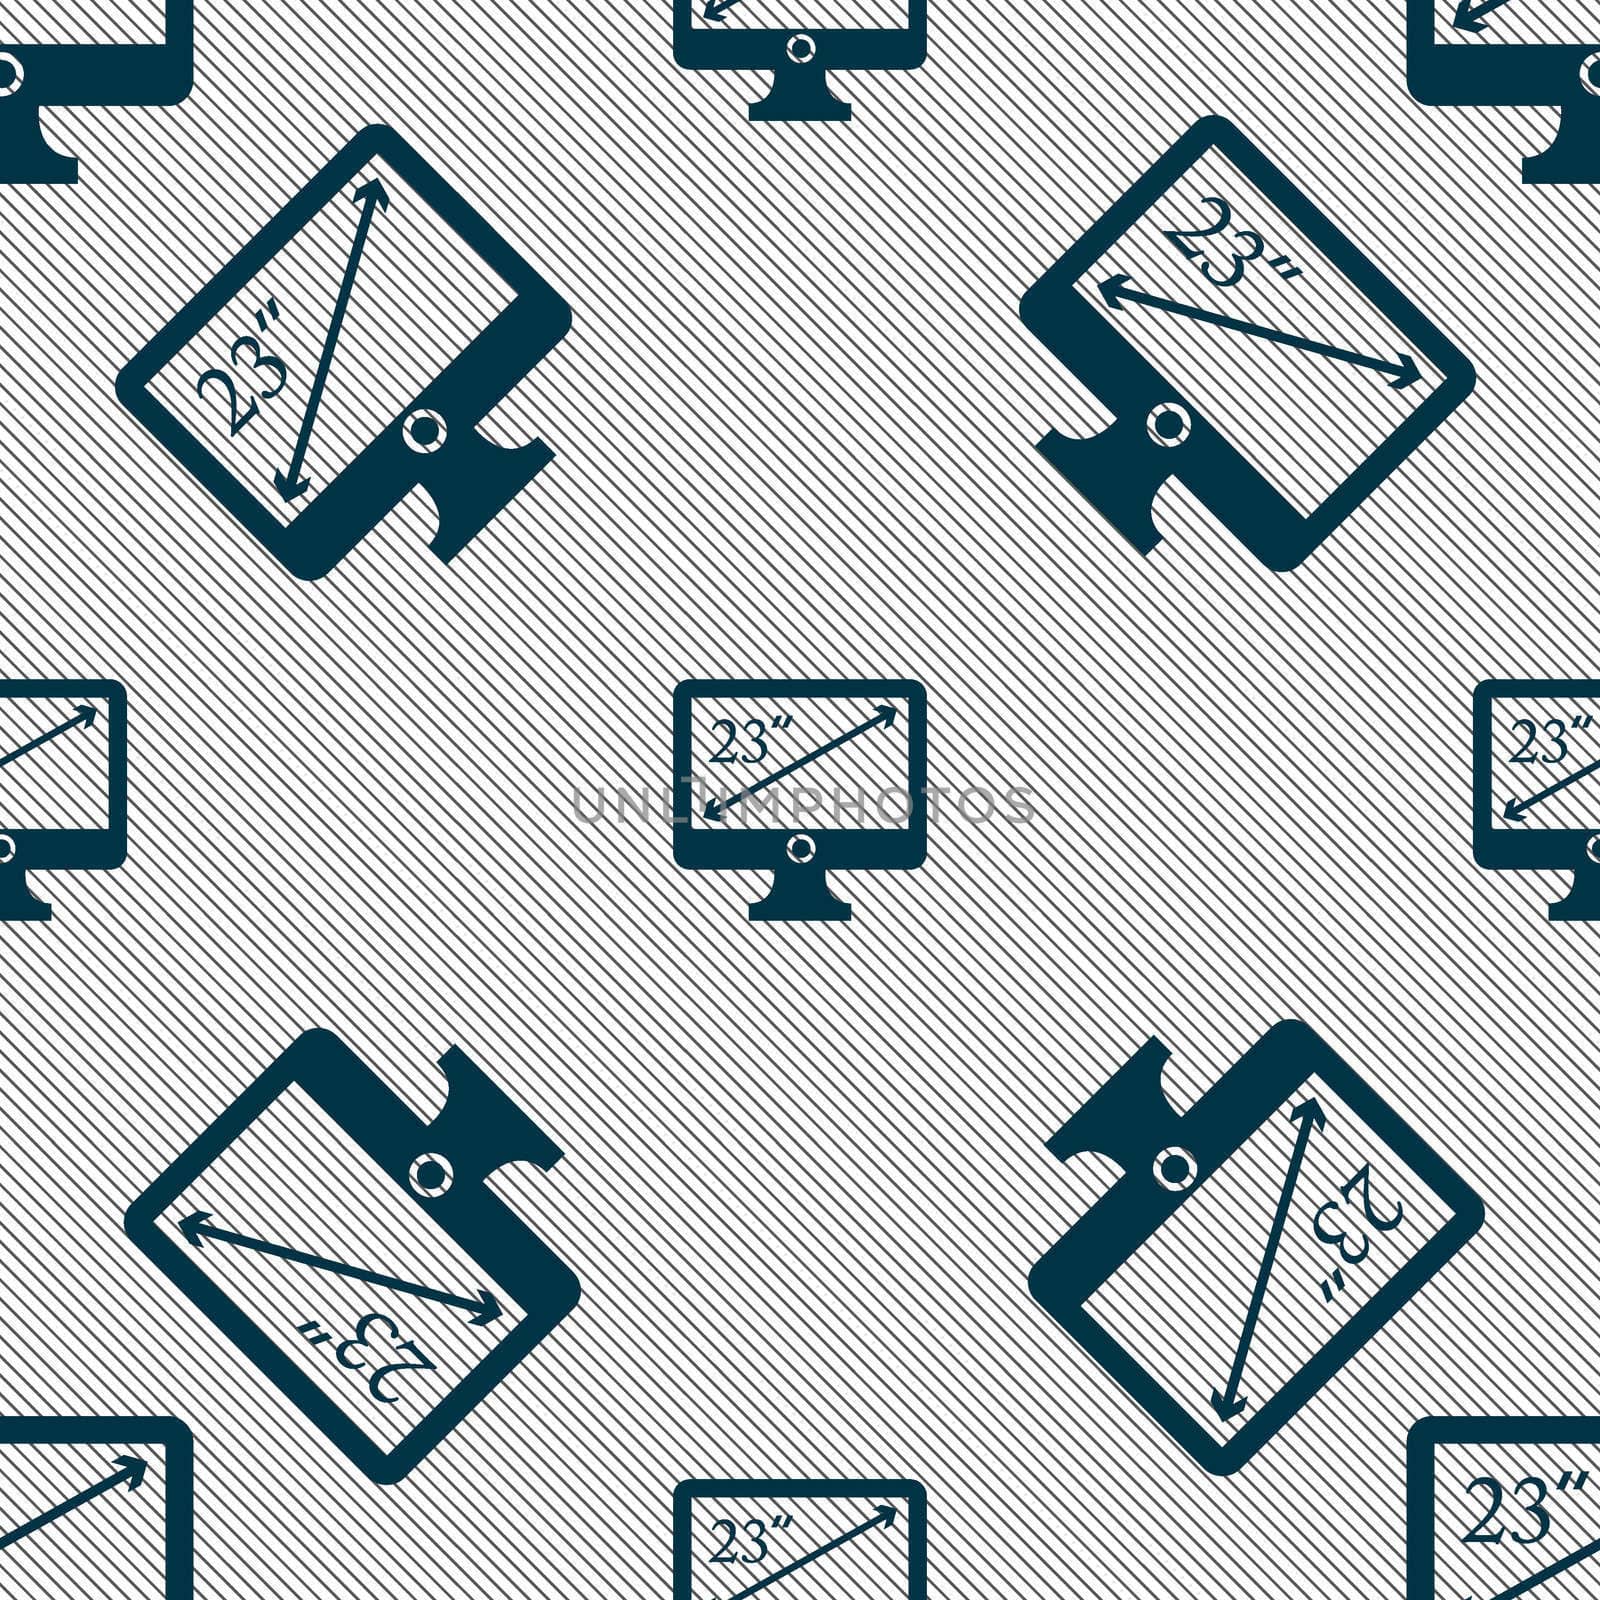 diagonal of the monitor 23 inches icon sign. Seamless pattern with geometric texture.  by serhii_lohvyniuk